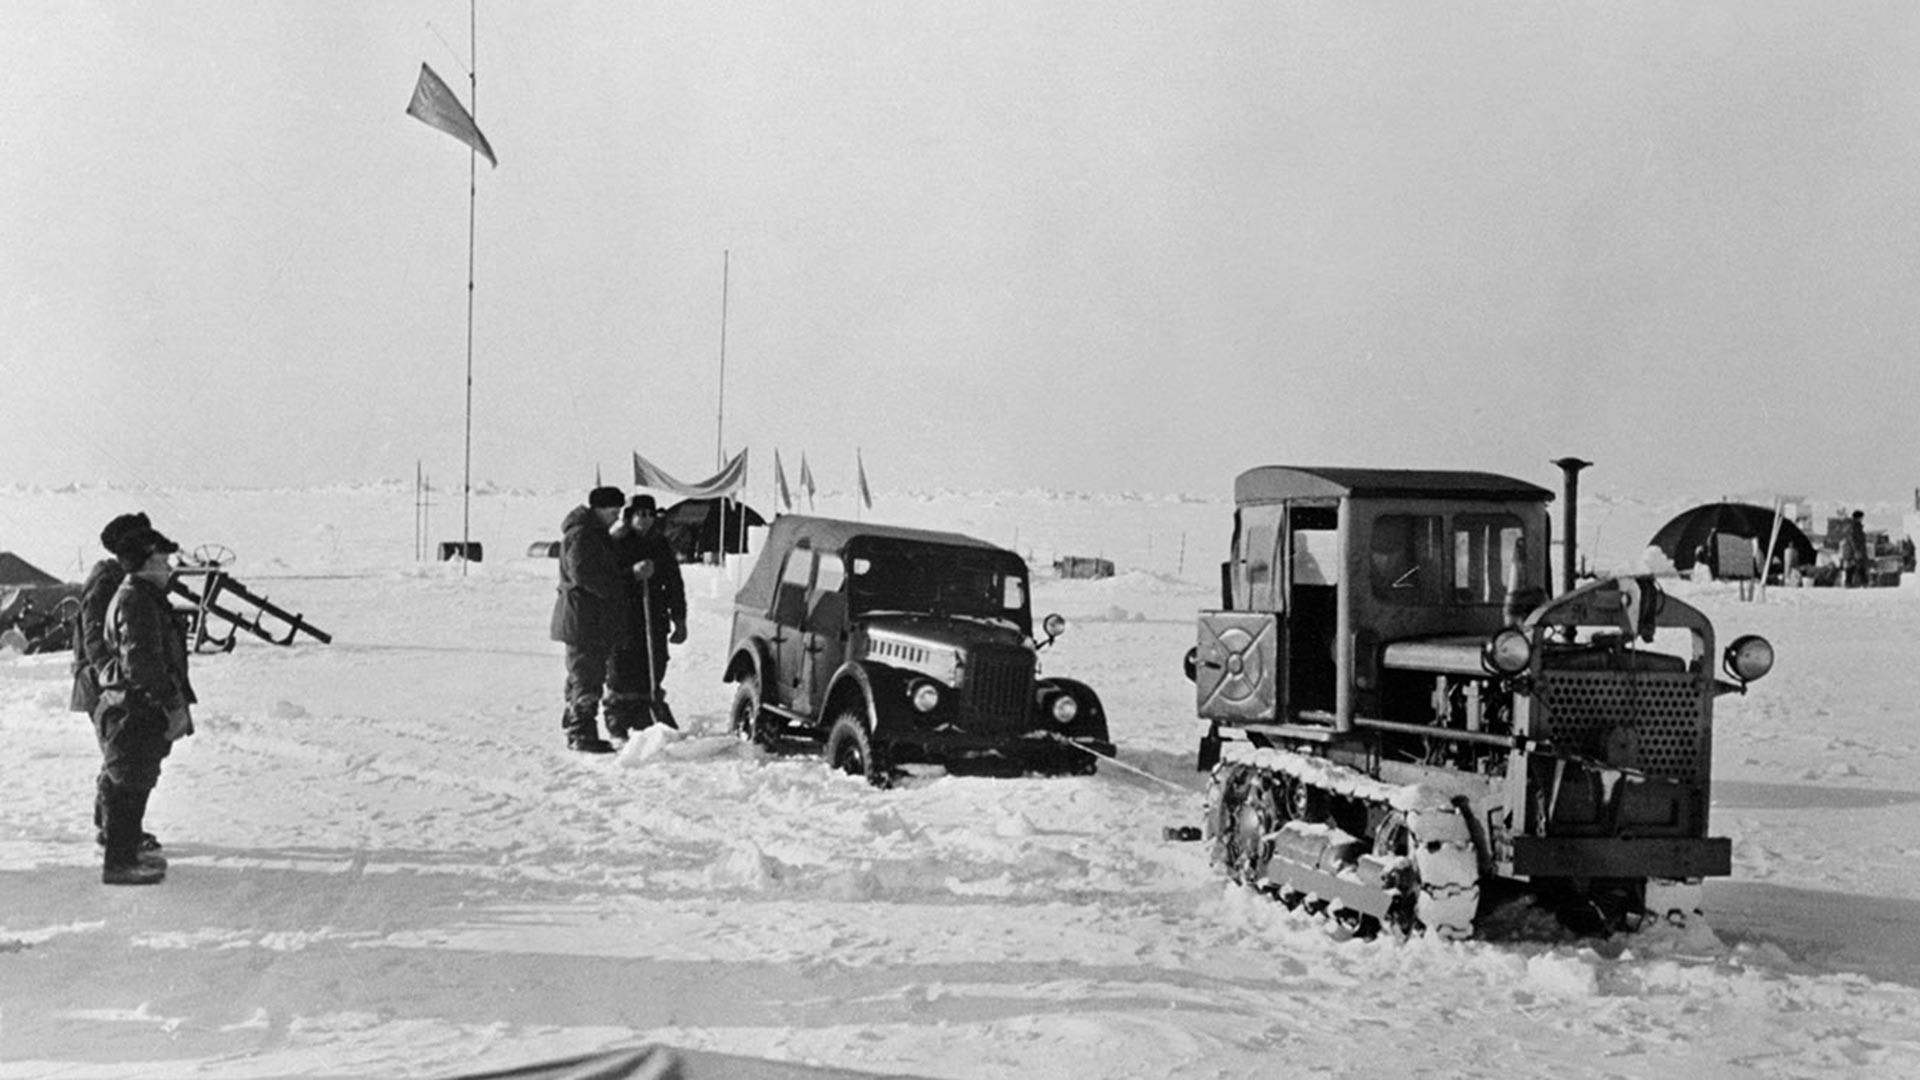 Tractor rescues disabled auto at one of the observation stations set up by Soviet Union scientists atop an ice floe in the Arctic region.